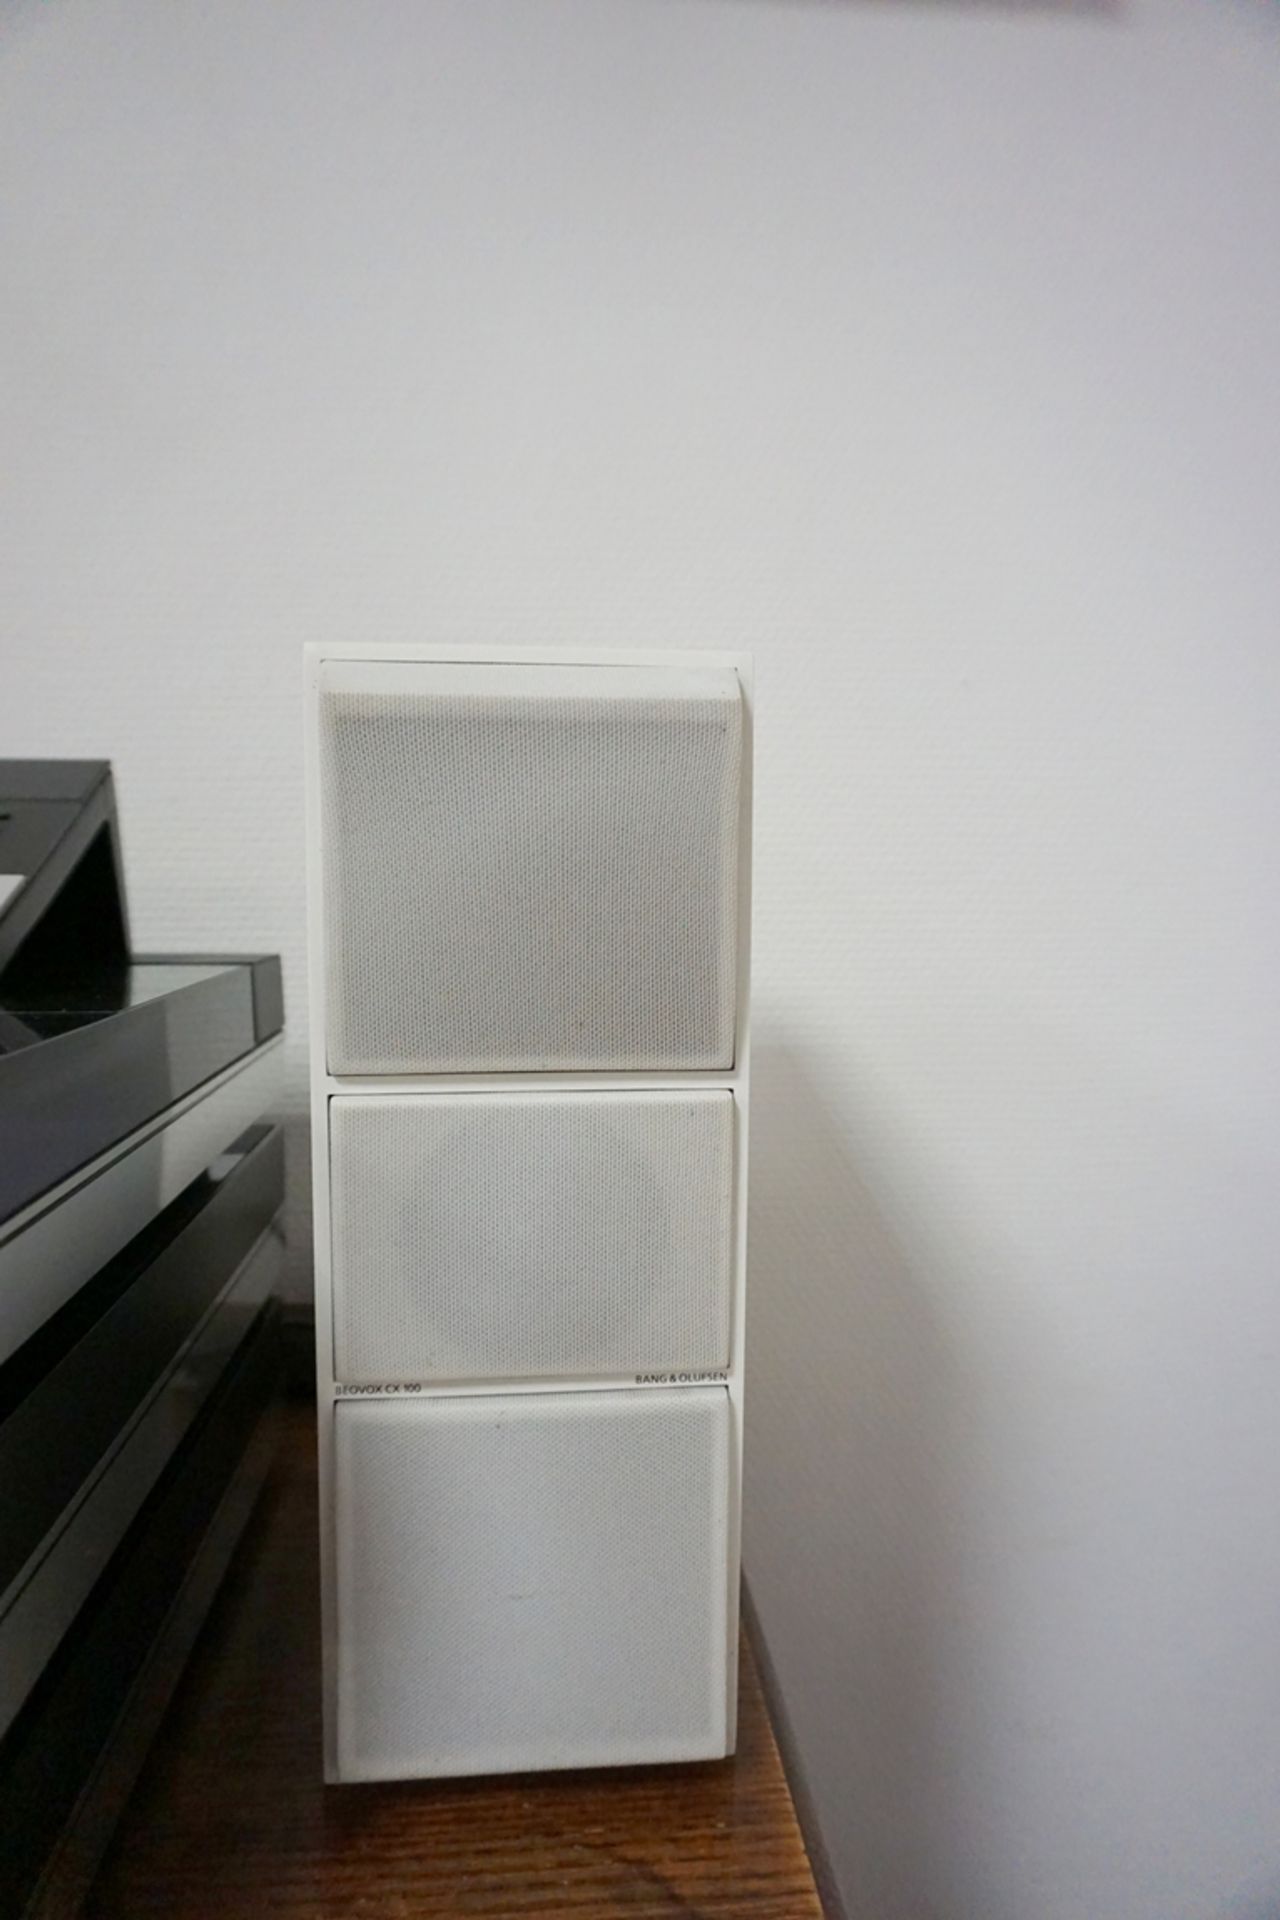 Bang&Olufsen Beosystem 6500/ 7000, 1980s - Image 5 of 9